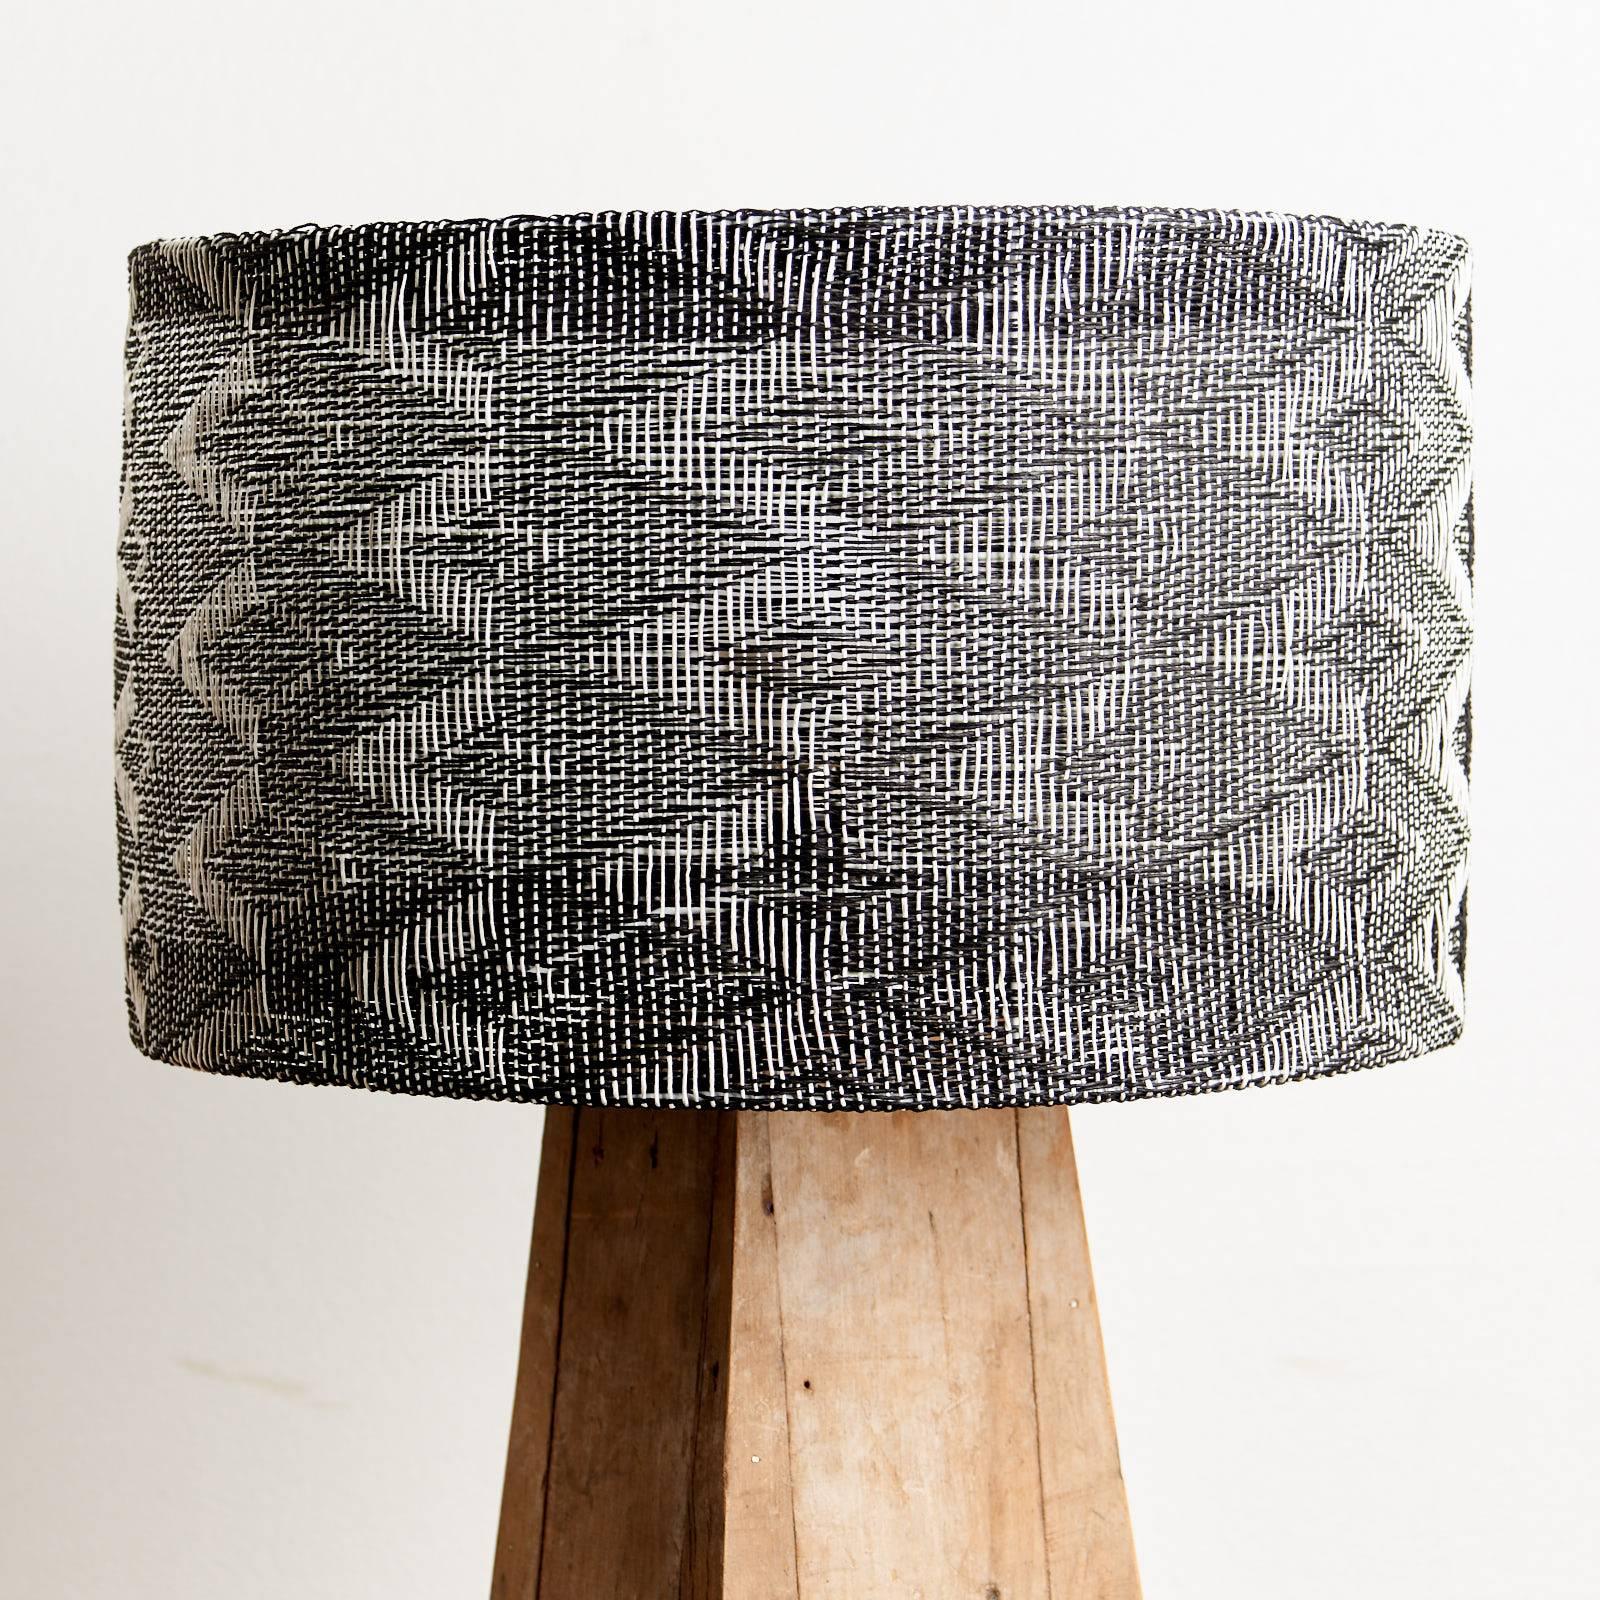 As a counterpoint to the usual bright and vibrant work Josefin created an exclusive Monochrome Capsule Collection for 2016's London Design Festival. The pieces explore the balance between light and dark interwoven patterns in relation to lighting.